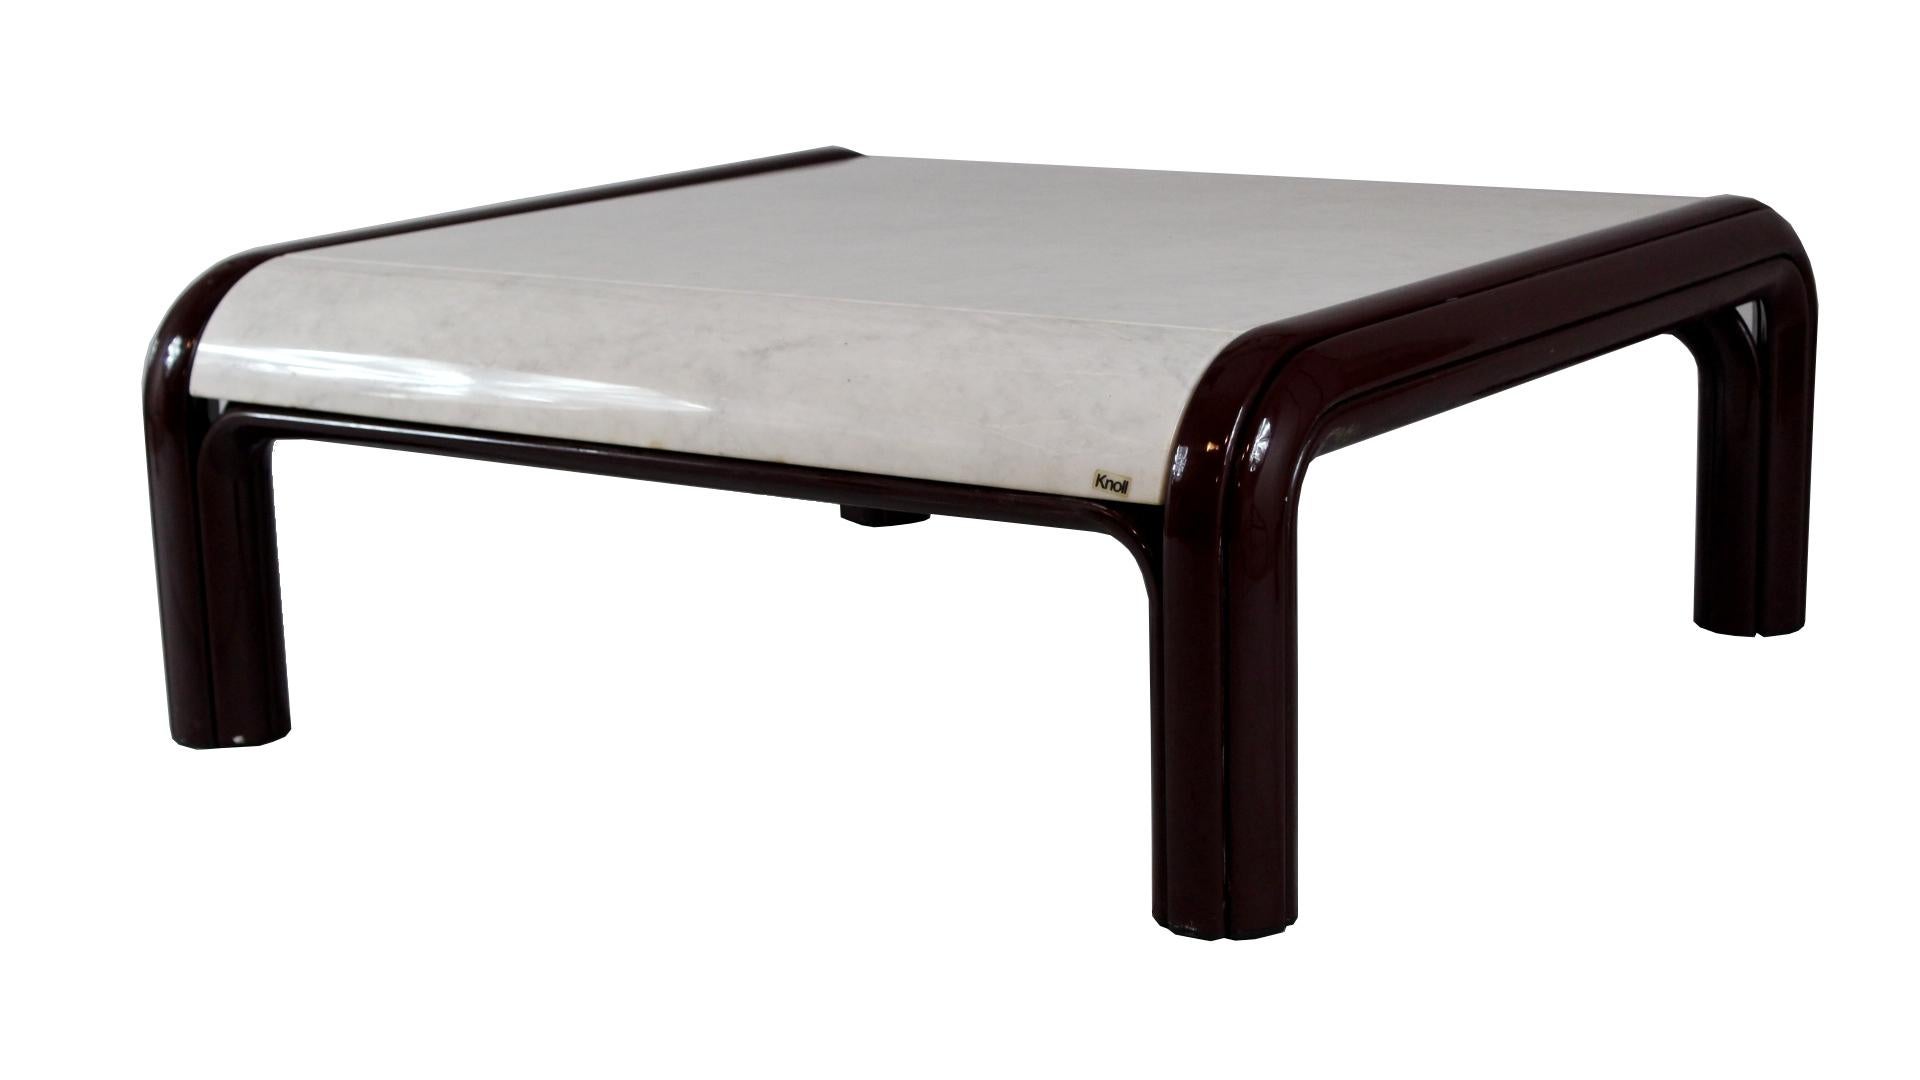 1970s Gae Aulenti Coffee Table for Knoll In Good Condition For Sale In Cimelice, Czech republic